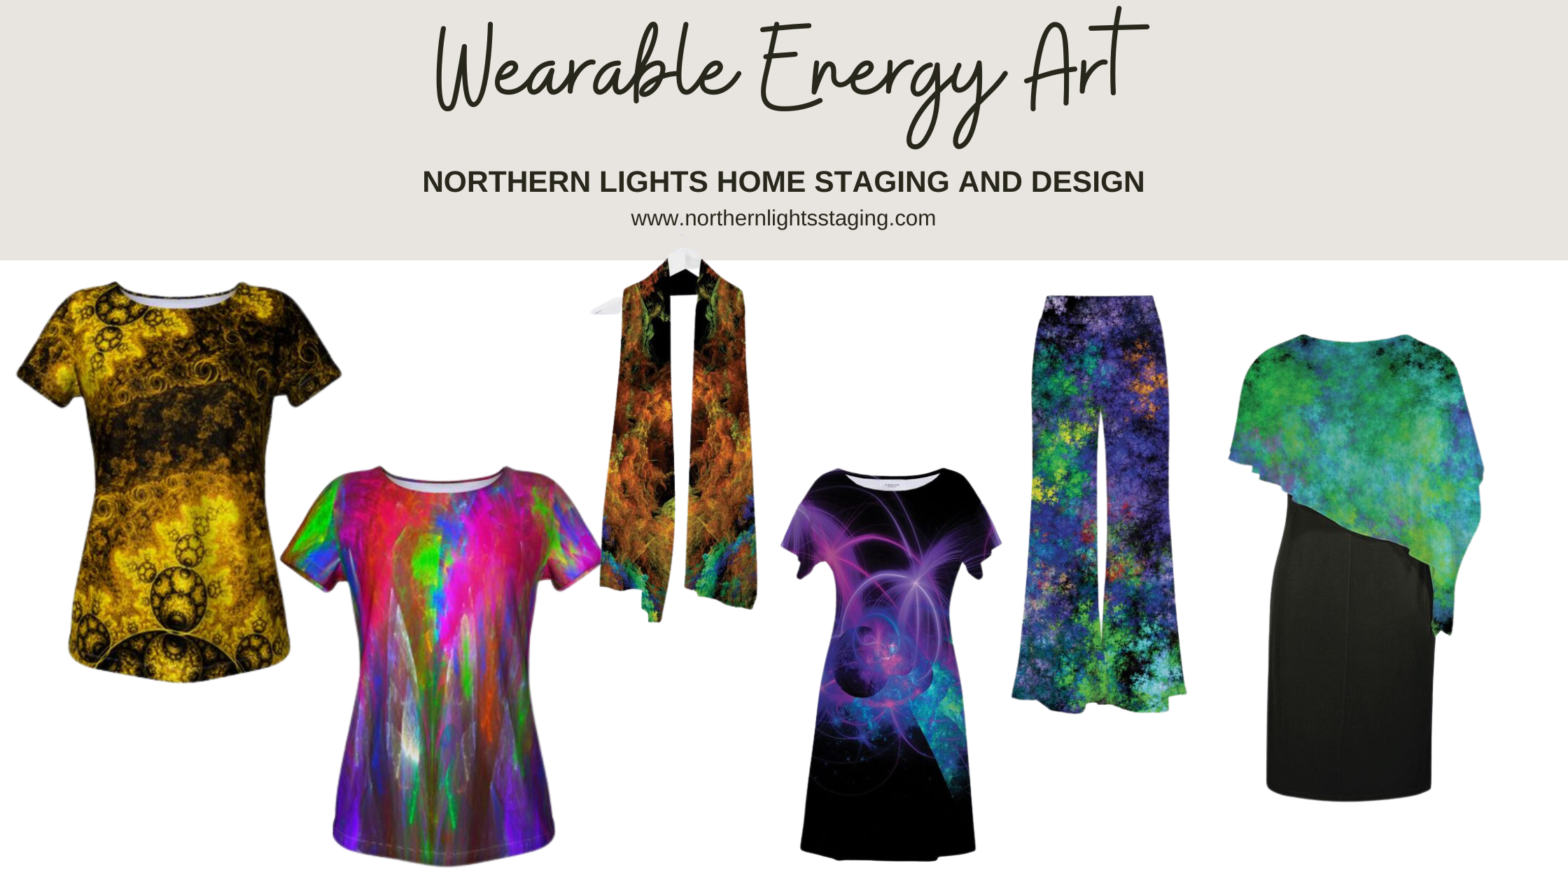 Wearable Energy Art by Northern Lights Home Staging and Design